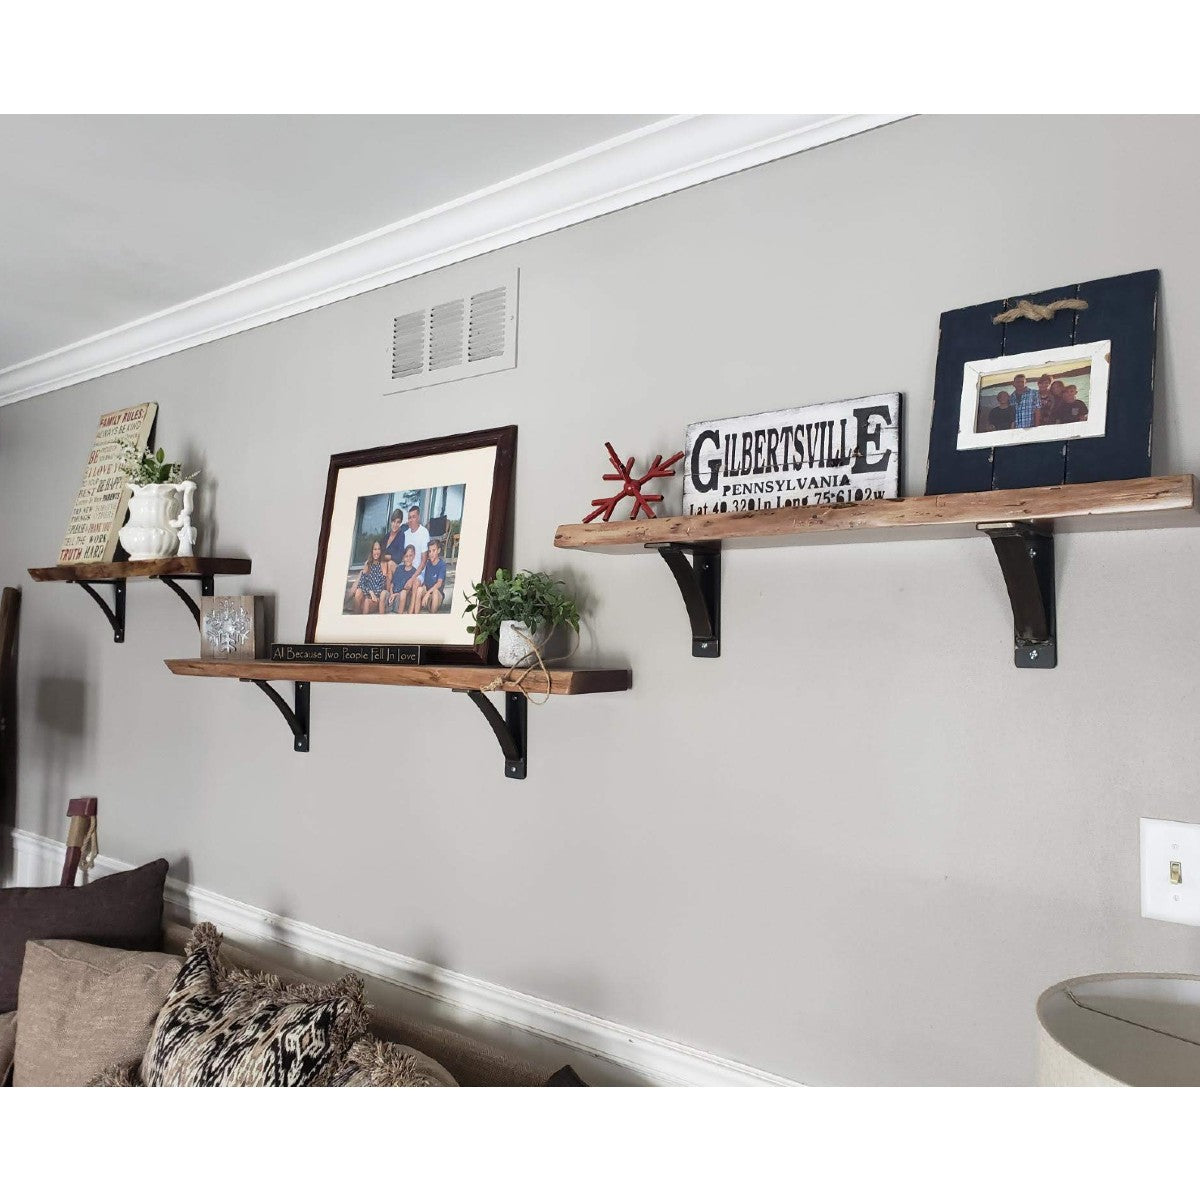 Wall Mounted Floating Shelves With Metal Frame, Rustic Wood